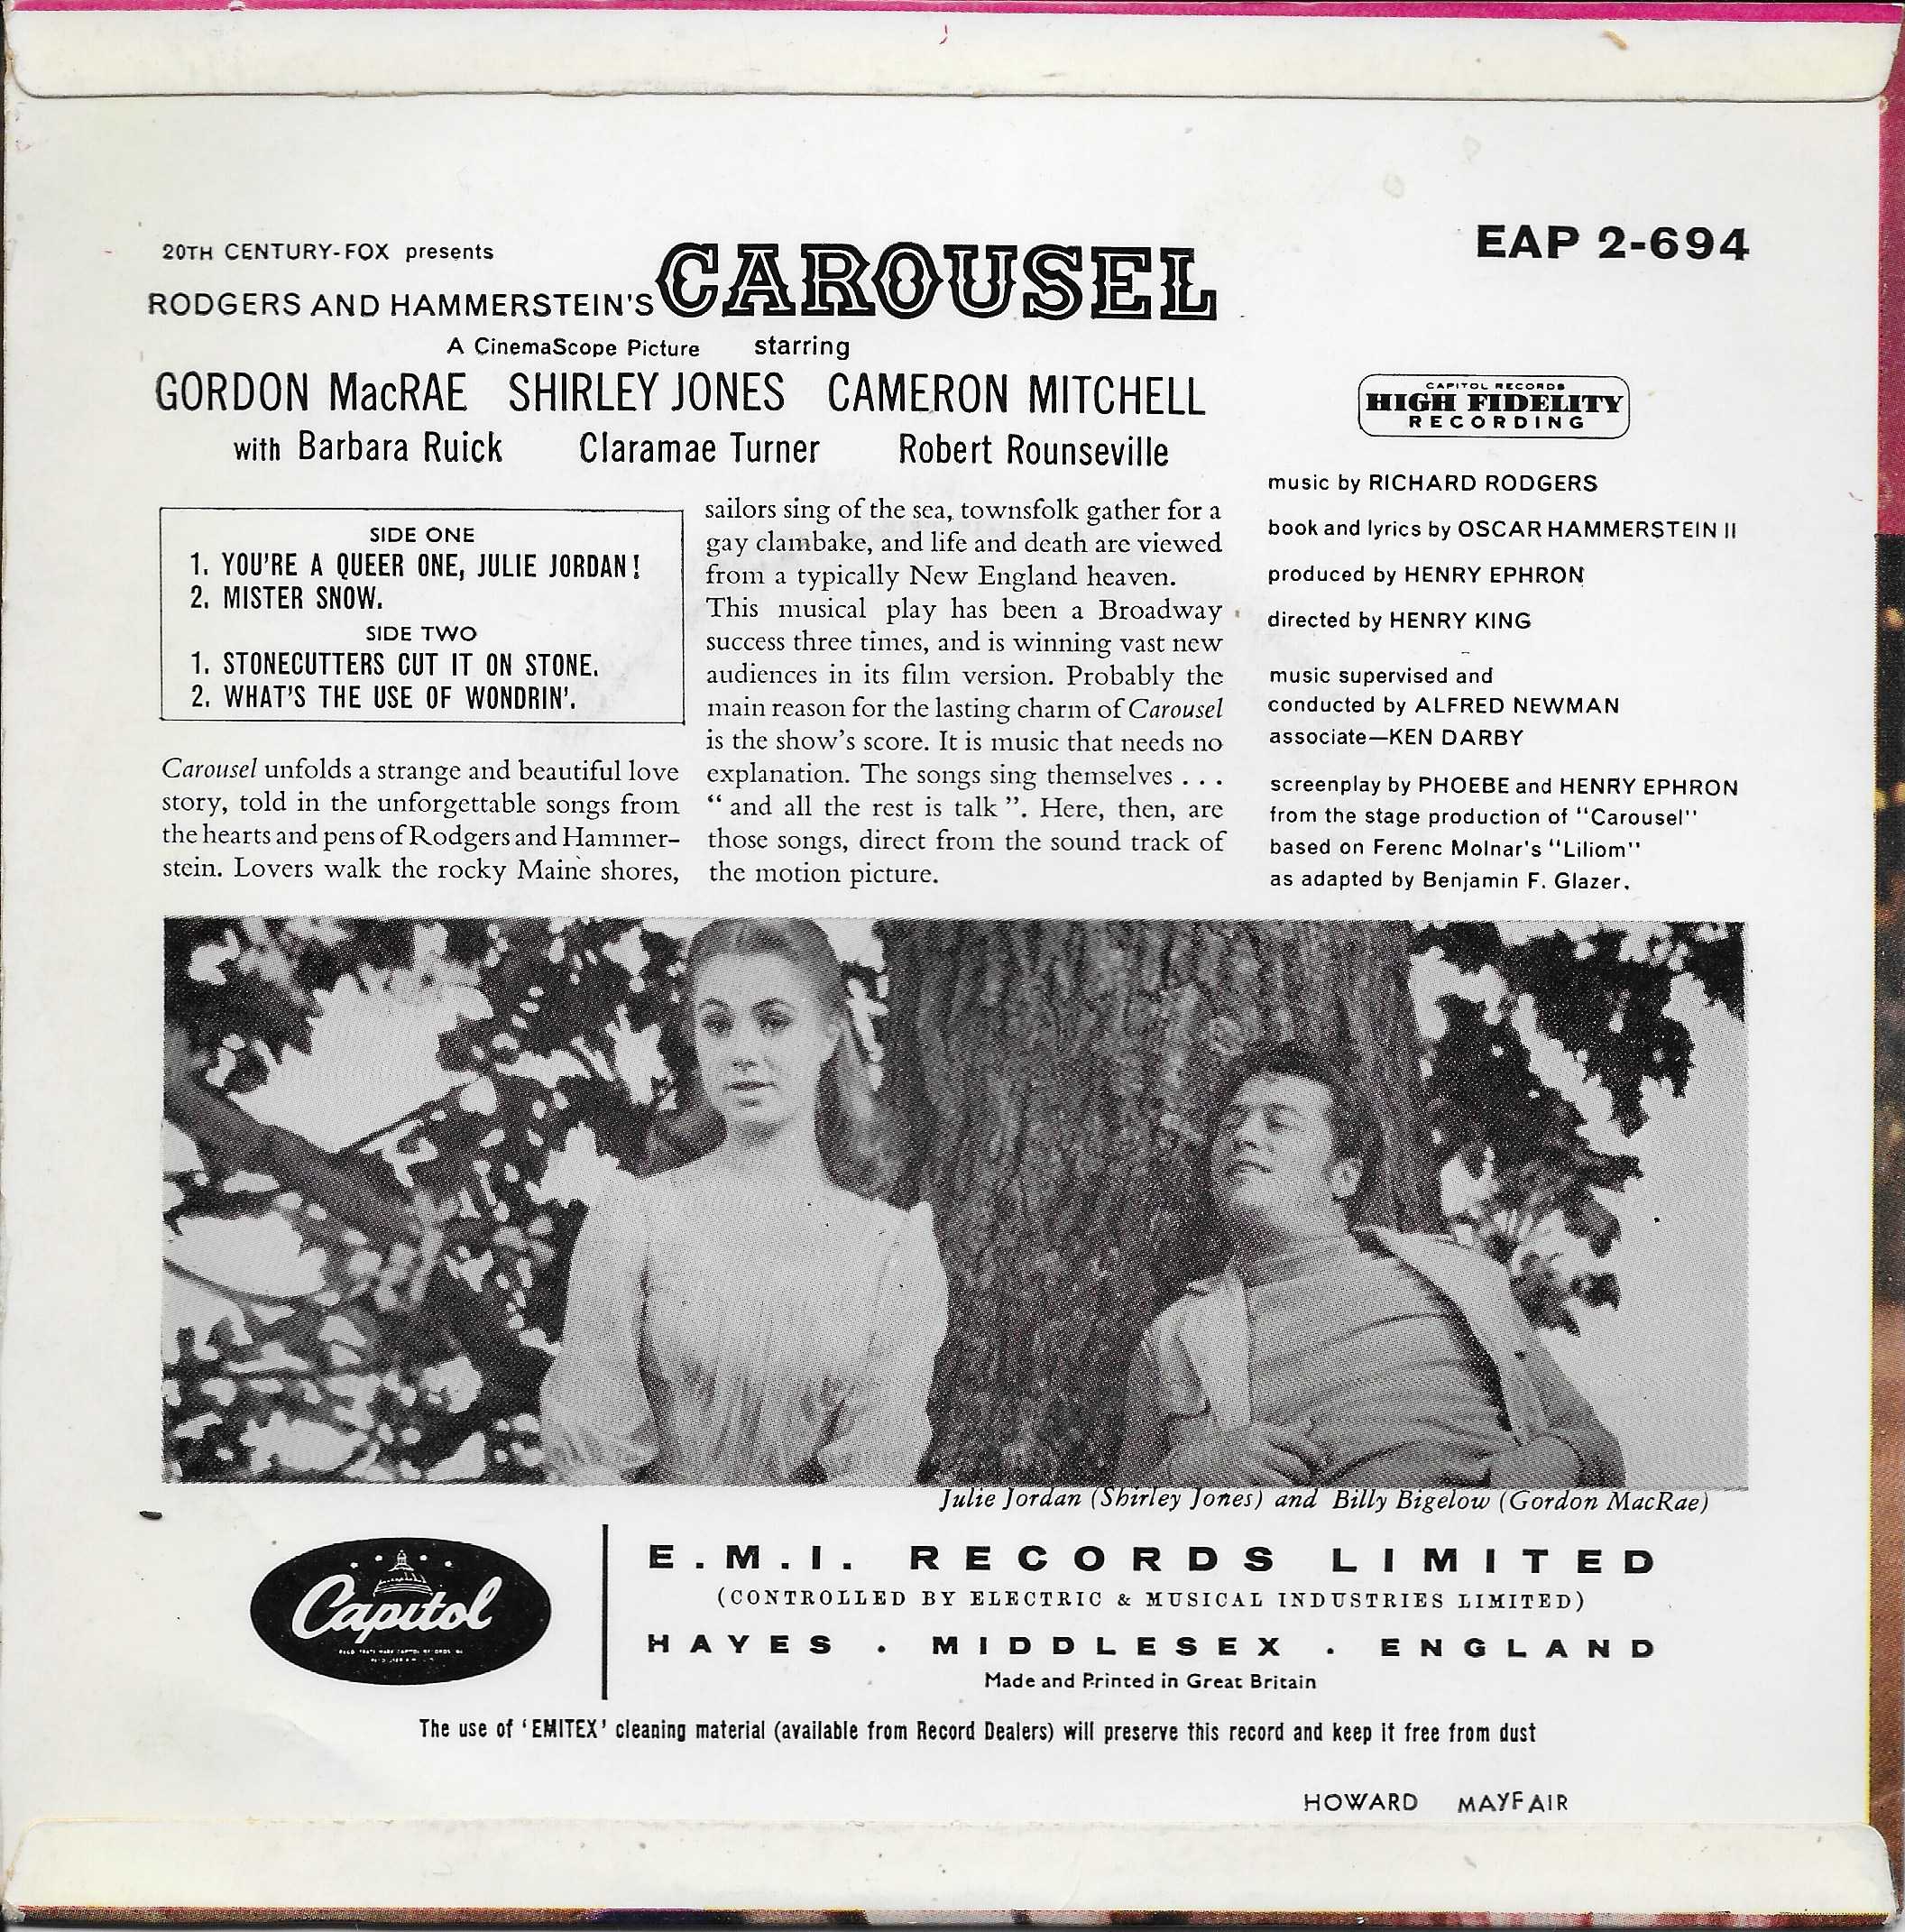 Picture of EAP 2-694 Carousel 2 by artist Rodgers / Hammerstein II from ITV, Channel 4 and Channel 5 library